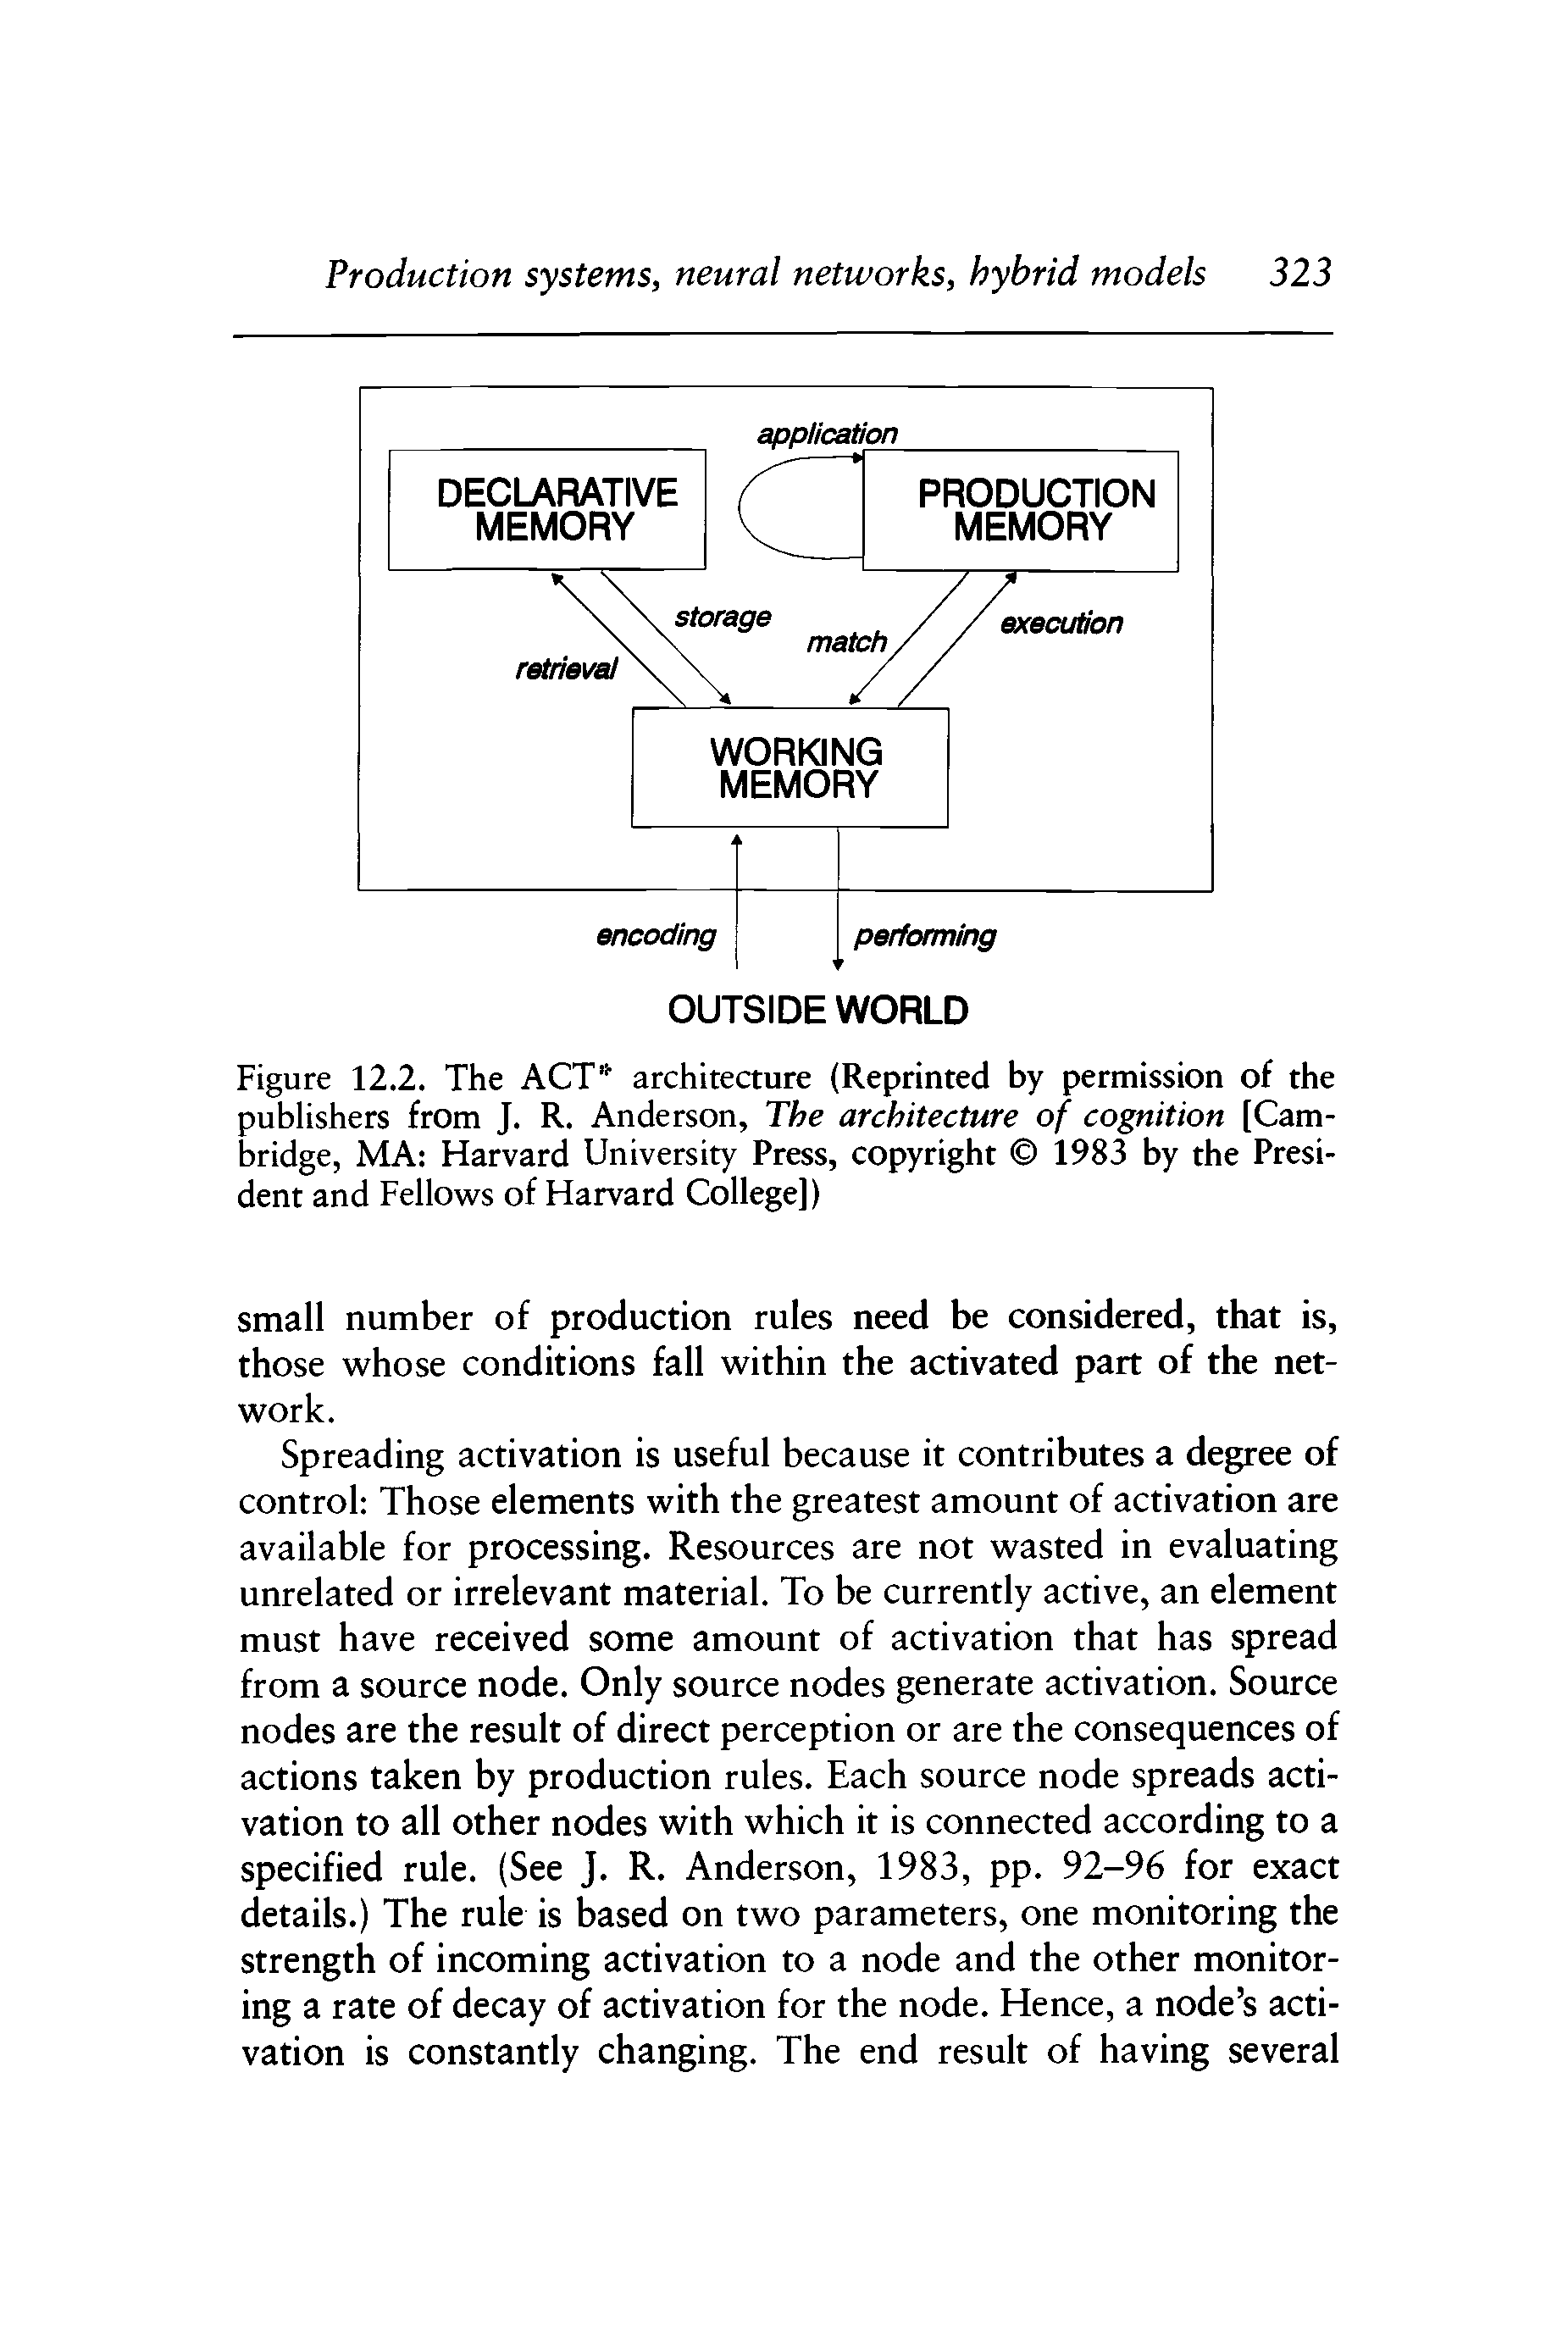 Figure 12.2. The ACT 1, architecture (Reprinted by permission of the publishers from J. R. Anderson, The architecture of cognition [Cambridge, MA Harvard University Press, copyright 1983 by the President and Fellows of Harvard College])...